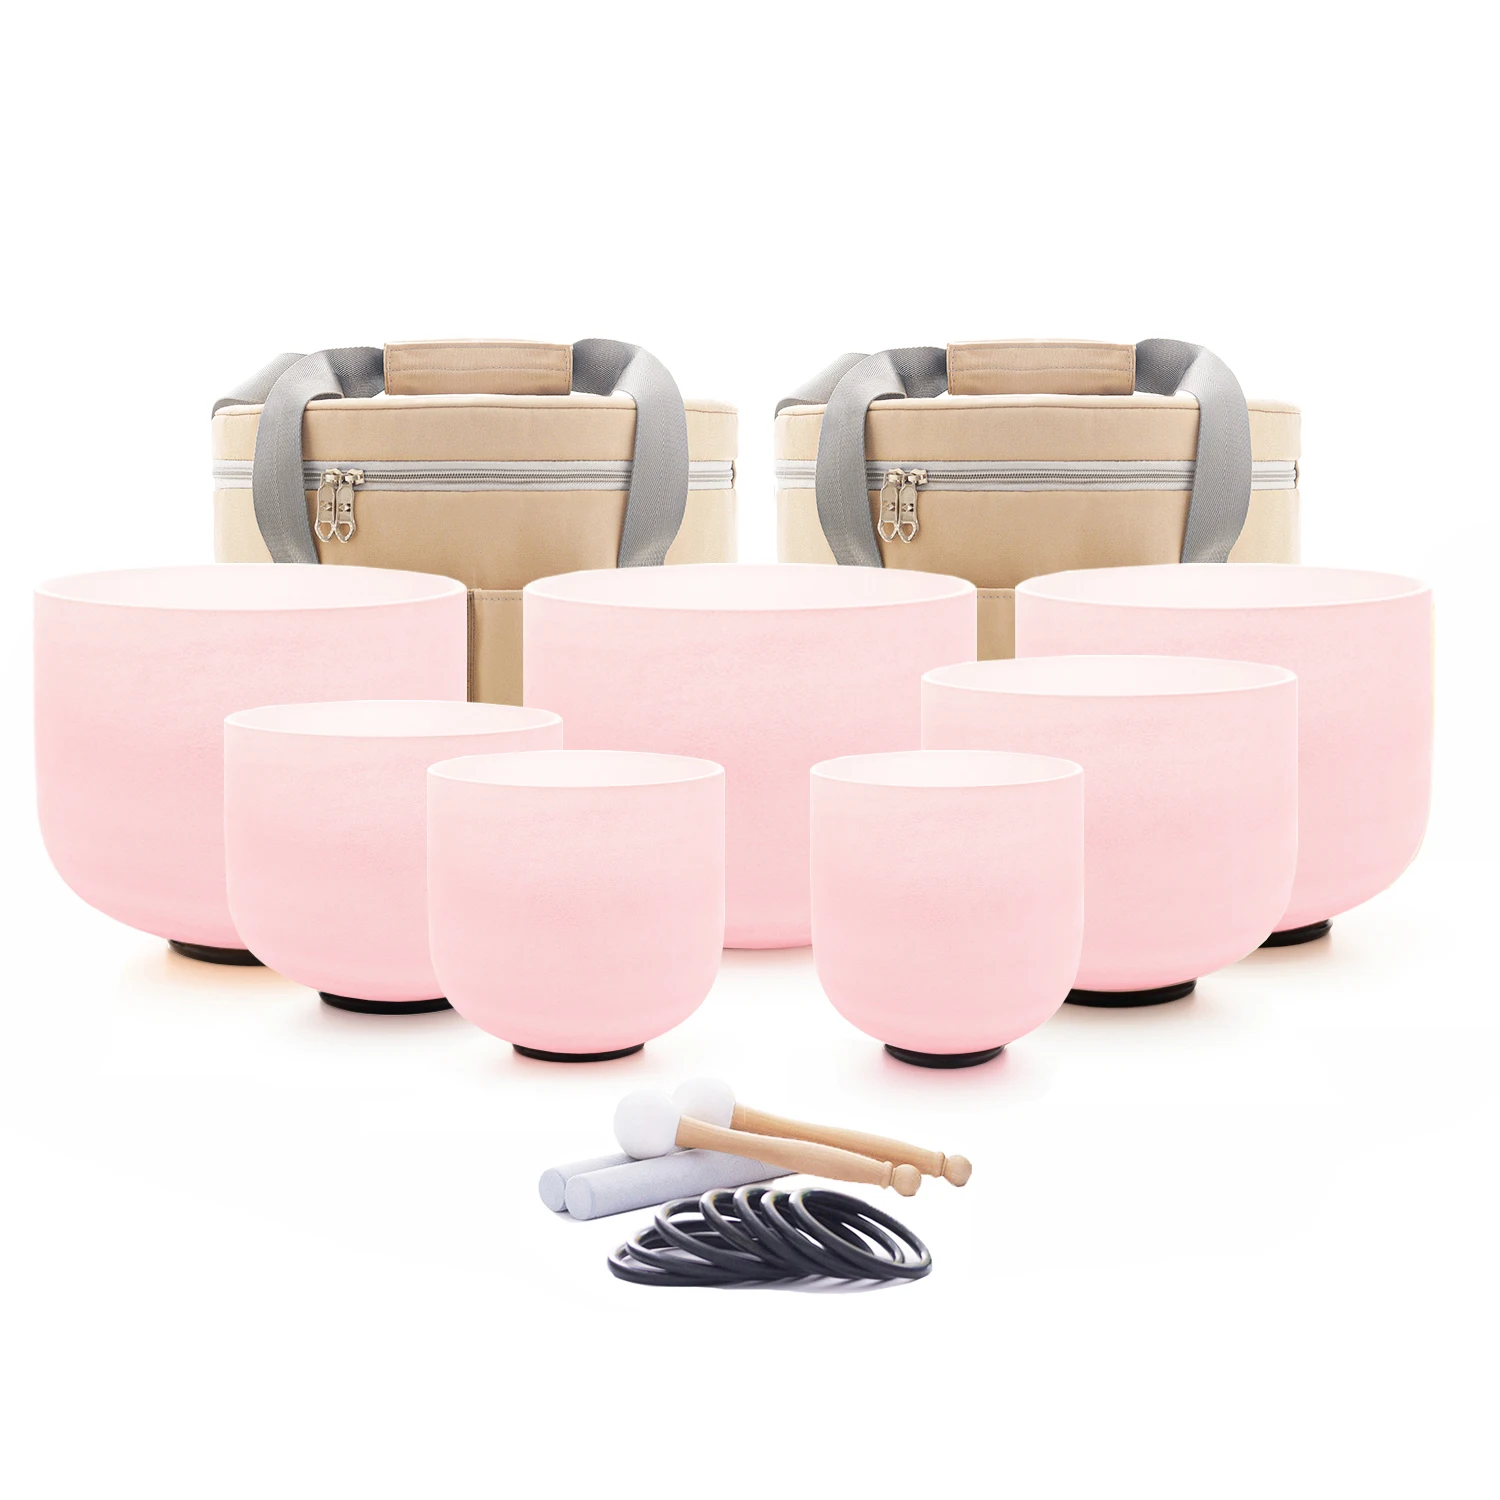 

Hye-eun 6-12inch Pink Frosted Quartz Crystal Singing Bowl 7pcs Chakra Set CDEFGAB Note with/without Carry Case for Sound Healing